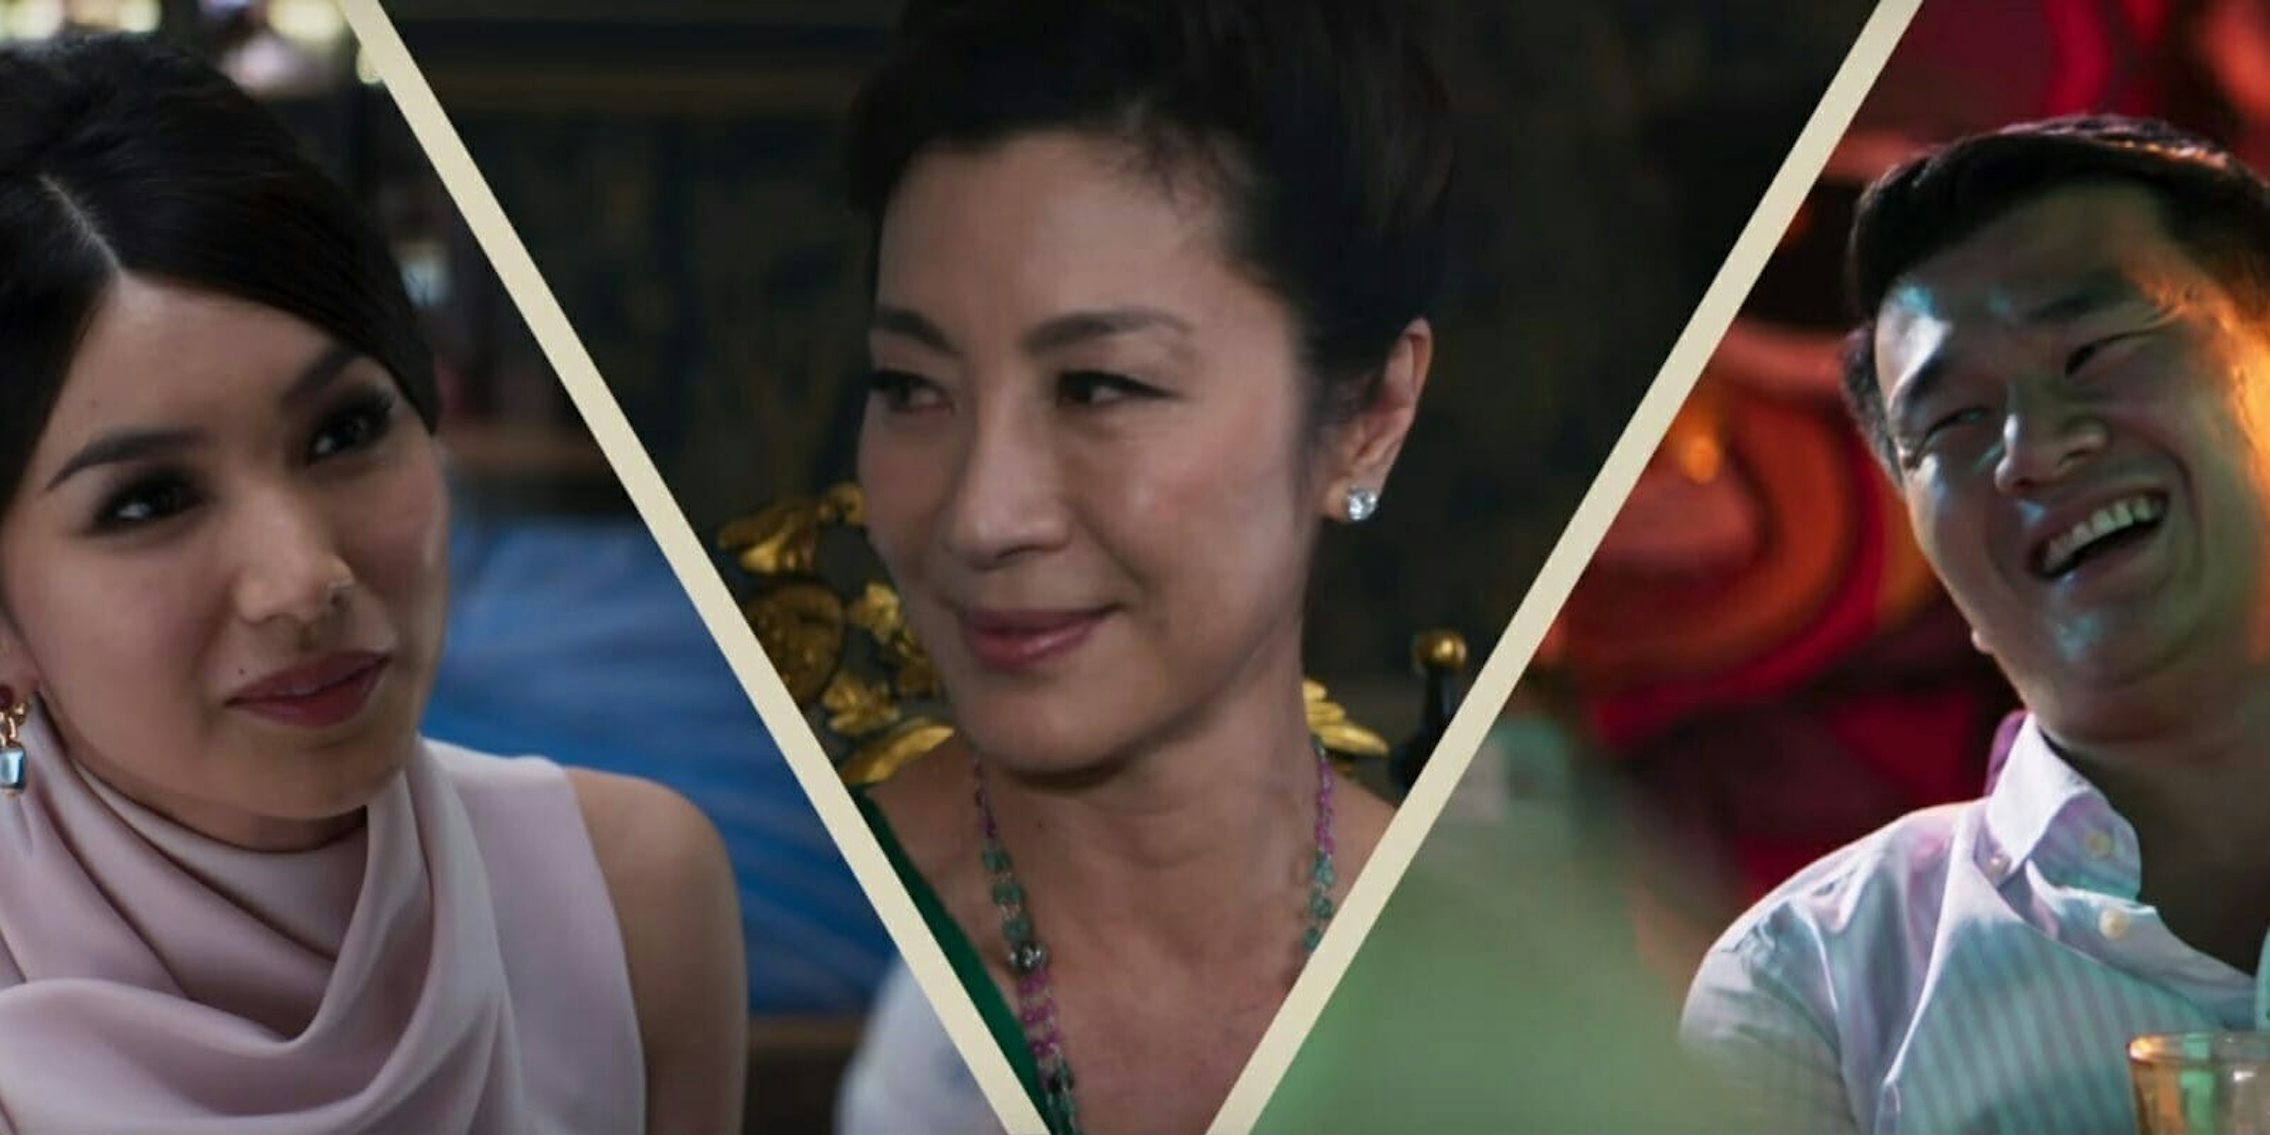 Based on Kevin Kwan’s novel of the same name, “Crazy Rich Asians” tells the story of Rachel Chu (Constance Wu), a smart, young economics professor at New York University who is dating Nick Young (Henry Golding), a man she later learns is essentially the Asian Prince Harry.